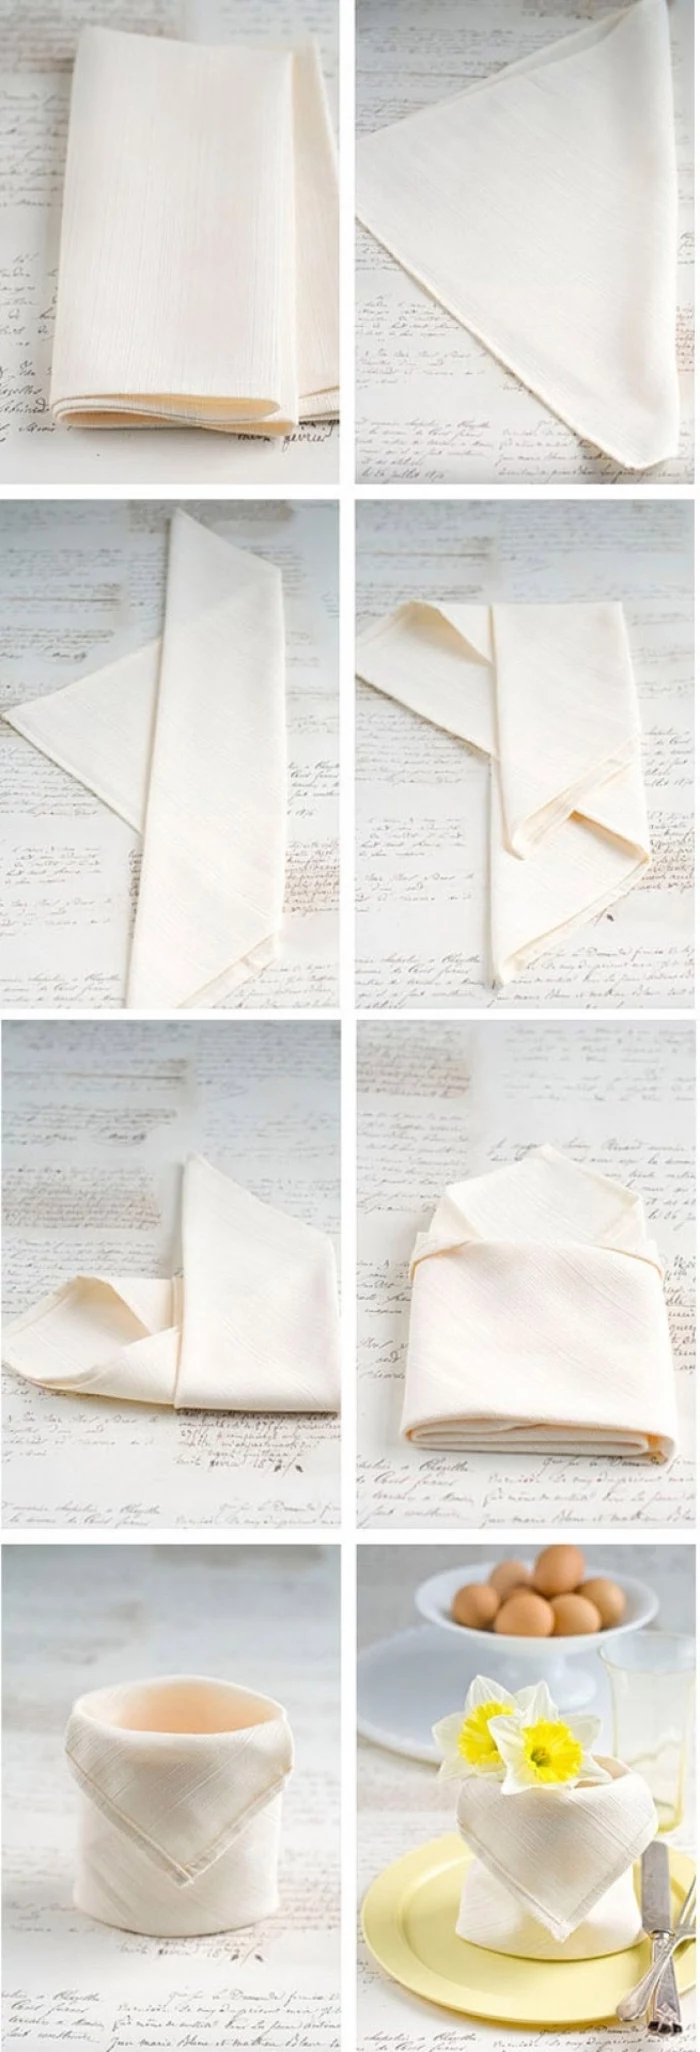 how to fold napkins with rings, white napkin, cup shaped, yellow flower inside, diy tutorial, step by step